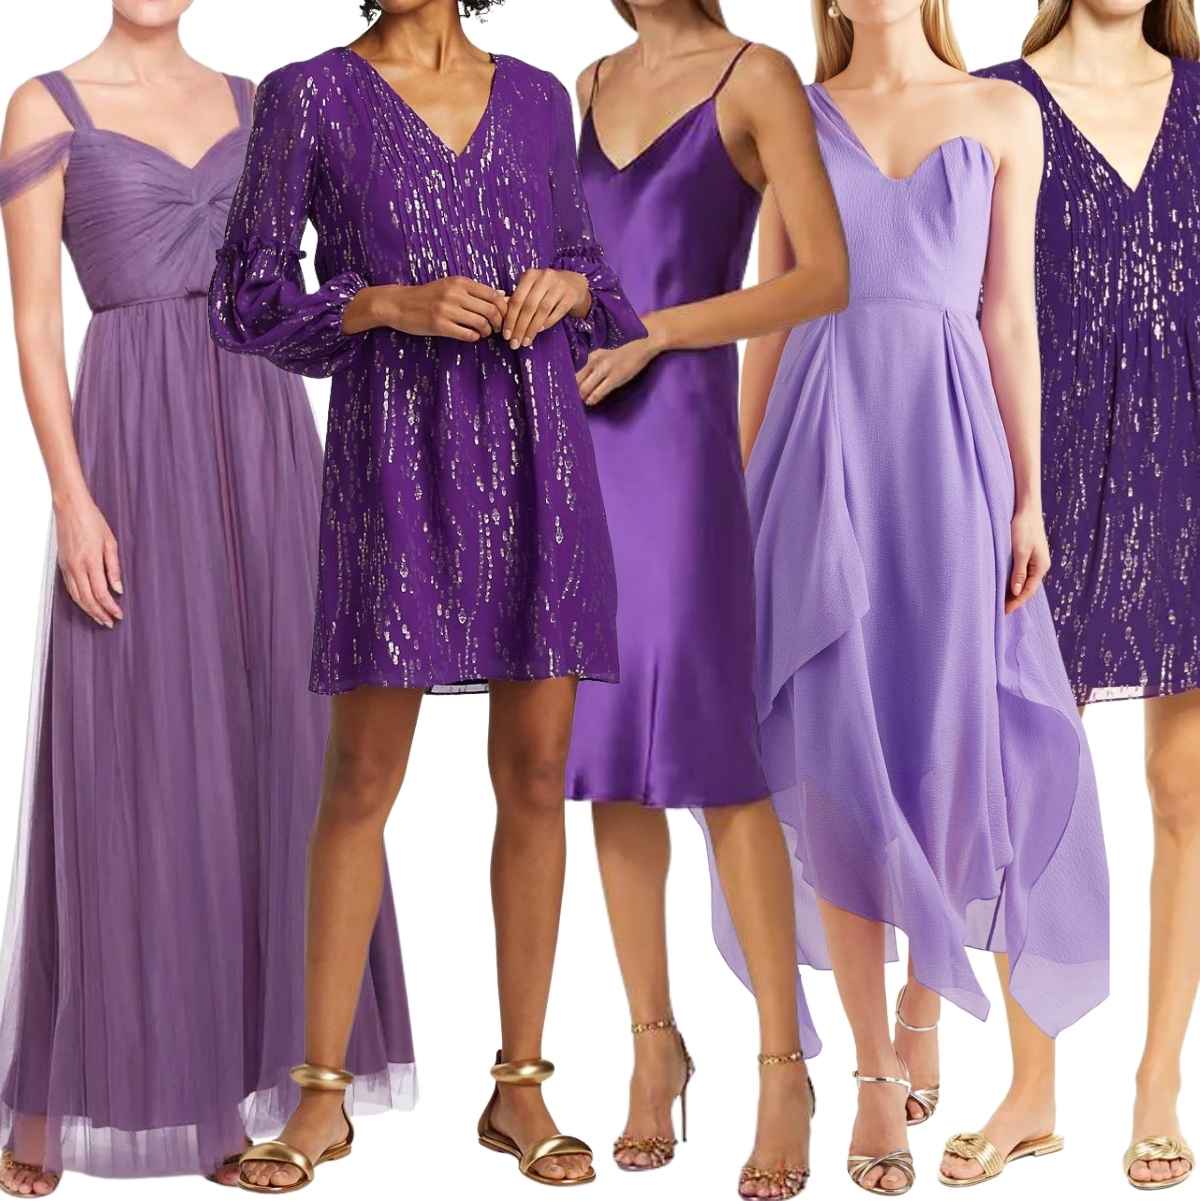 What Color Shoes to Wear with Purple Dress Outfit